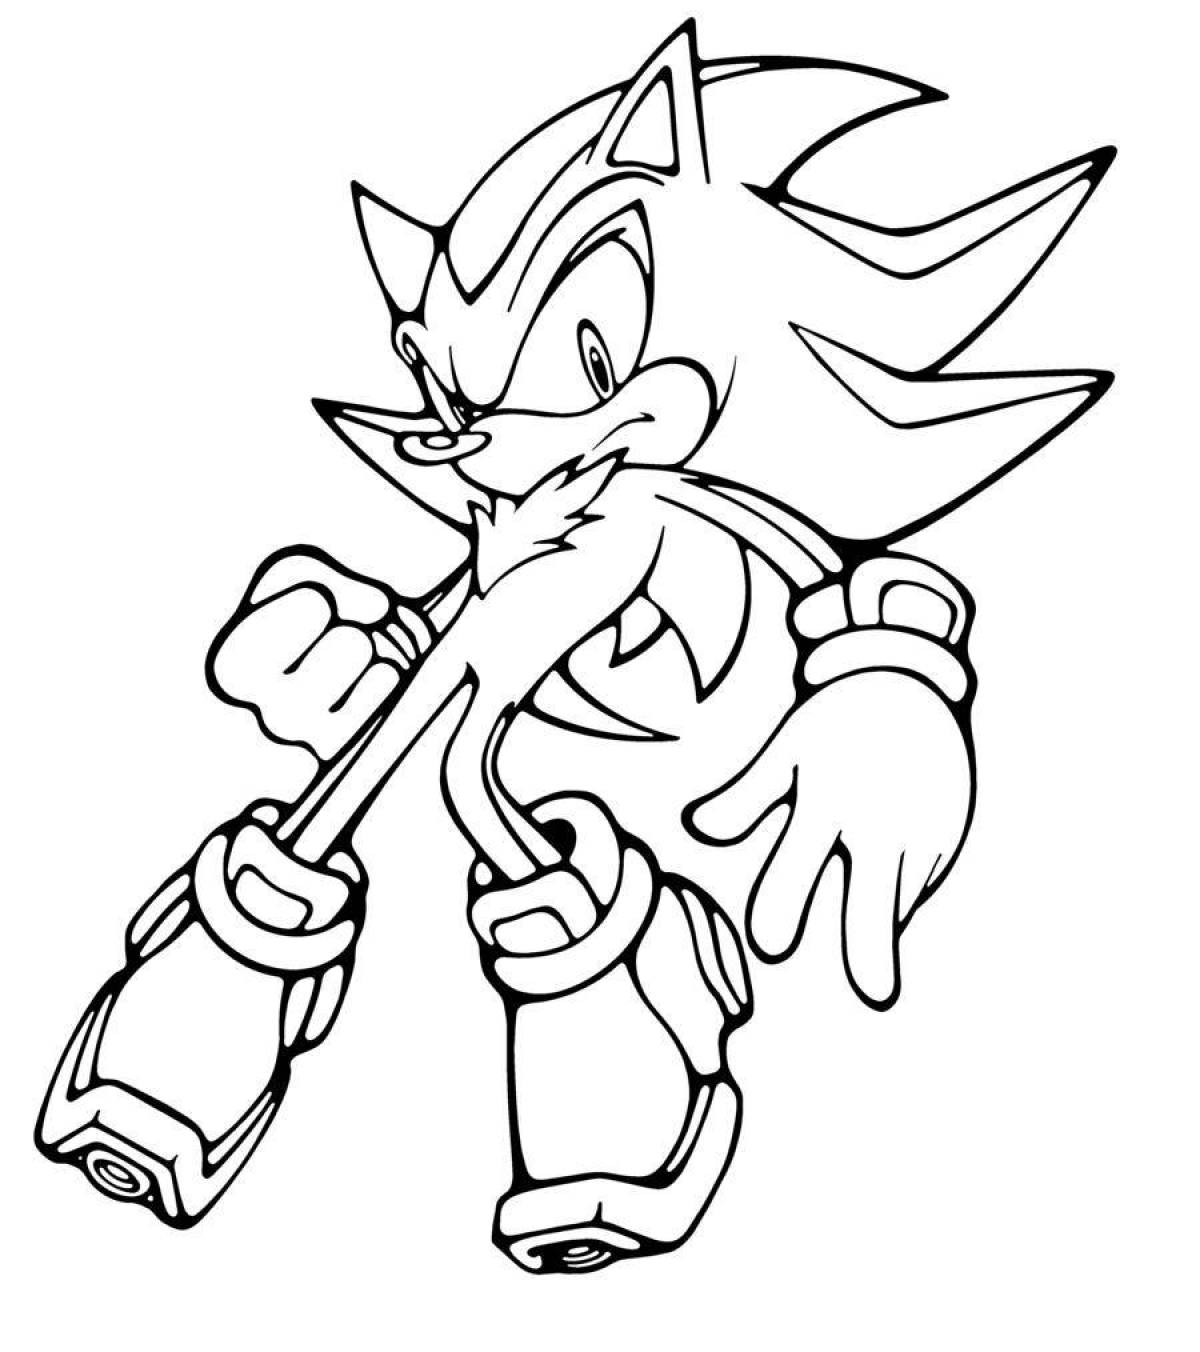 Sonic boom dynamic coloring